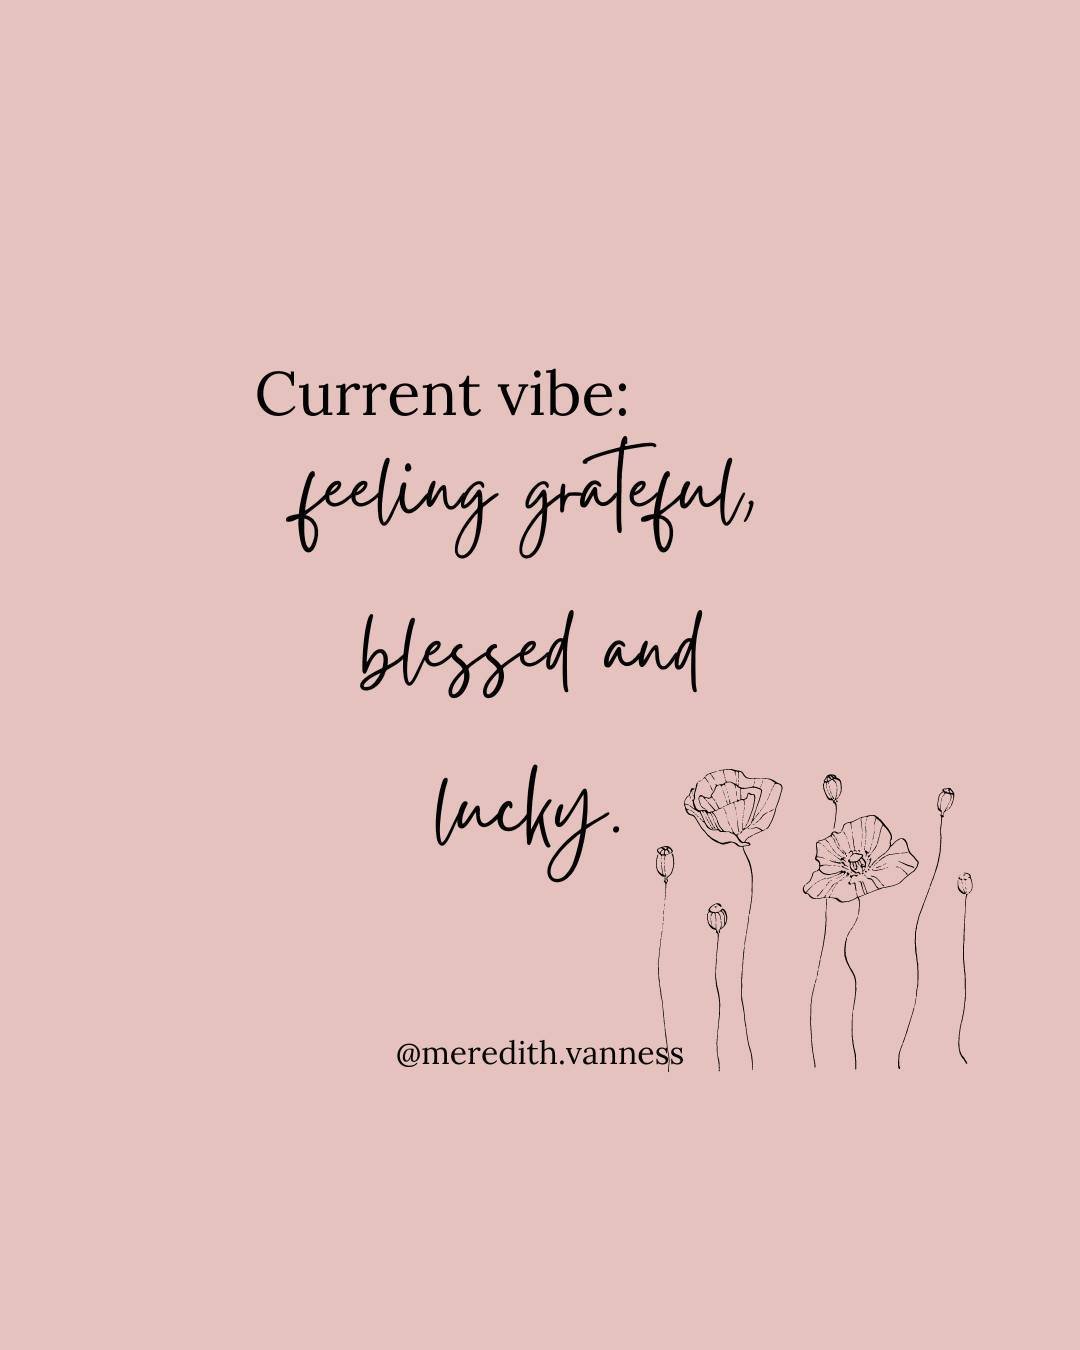 Which word do you like best? Grateful, blessed, or lucky? Or all 3? ⁠
⁠
Comment below! ⁠
⁠
I am happy you are here! ⁠
⁠
xx⁠
Meredith @meredith.vanness⁠
⁠
Comment., share and save for daily reminders to help you be intentional and confident. ⁠
⁠
=====